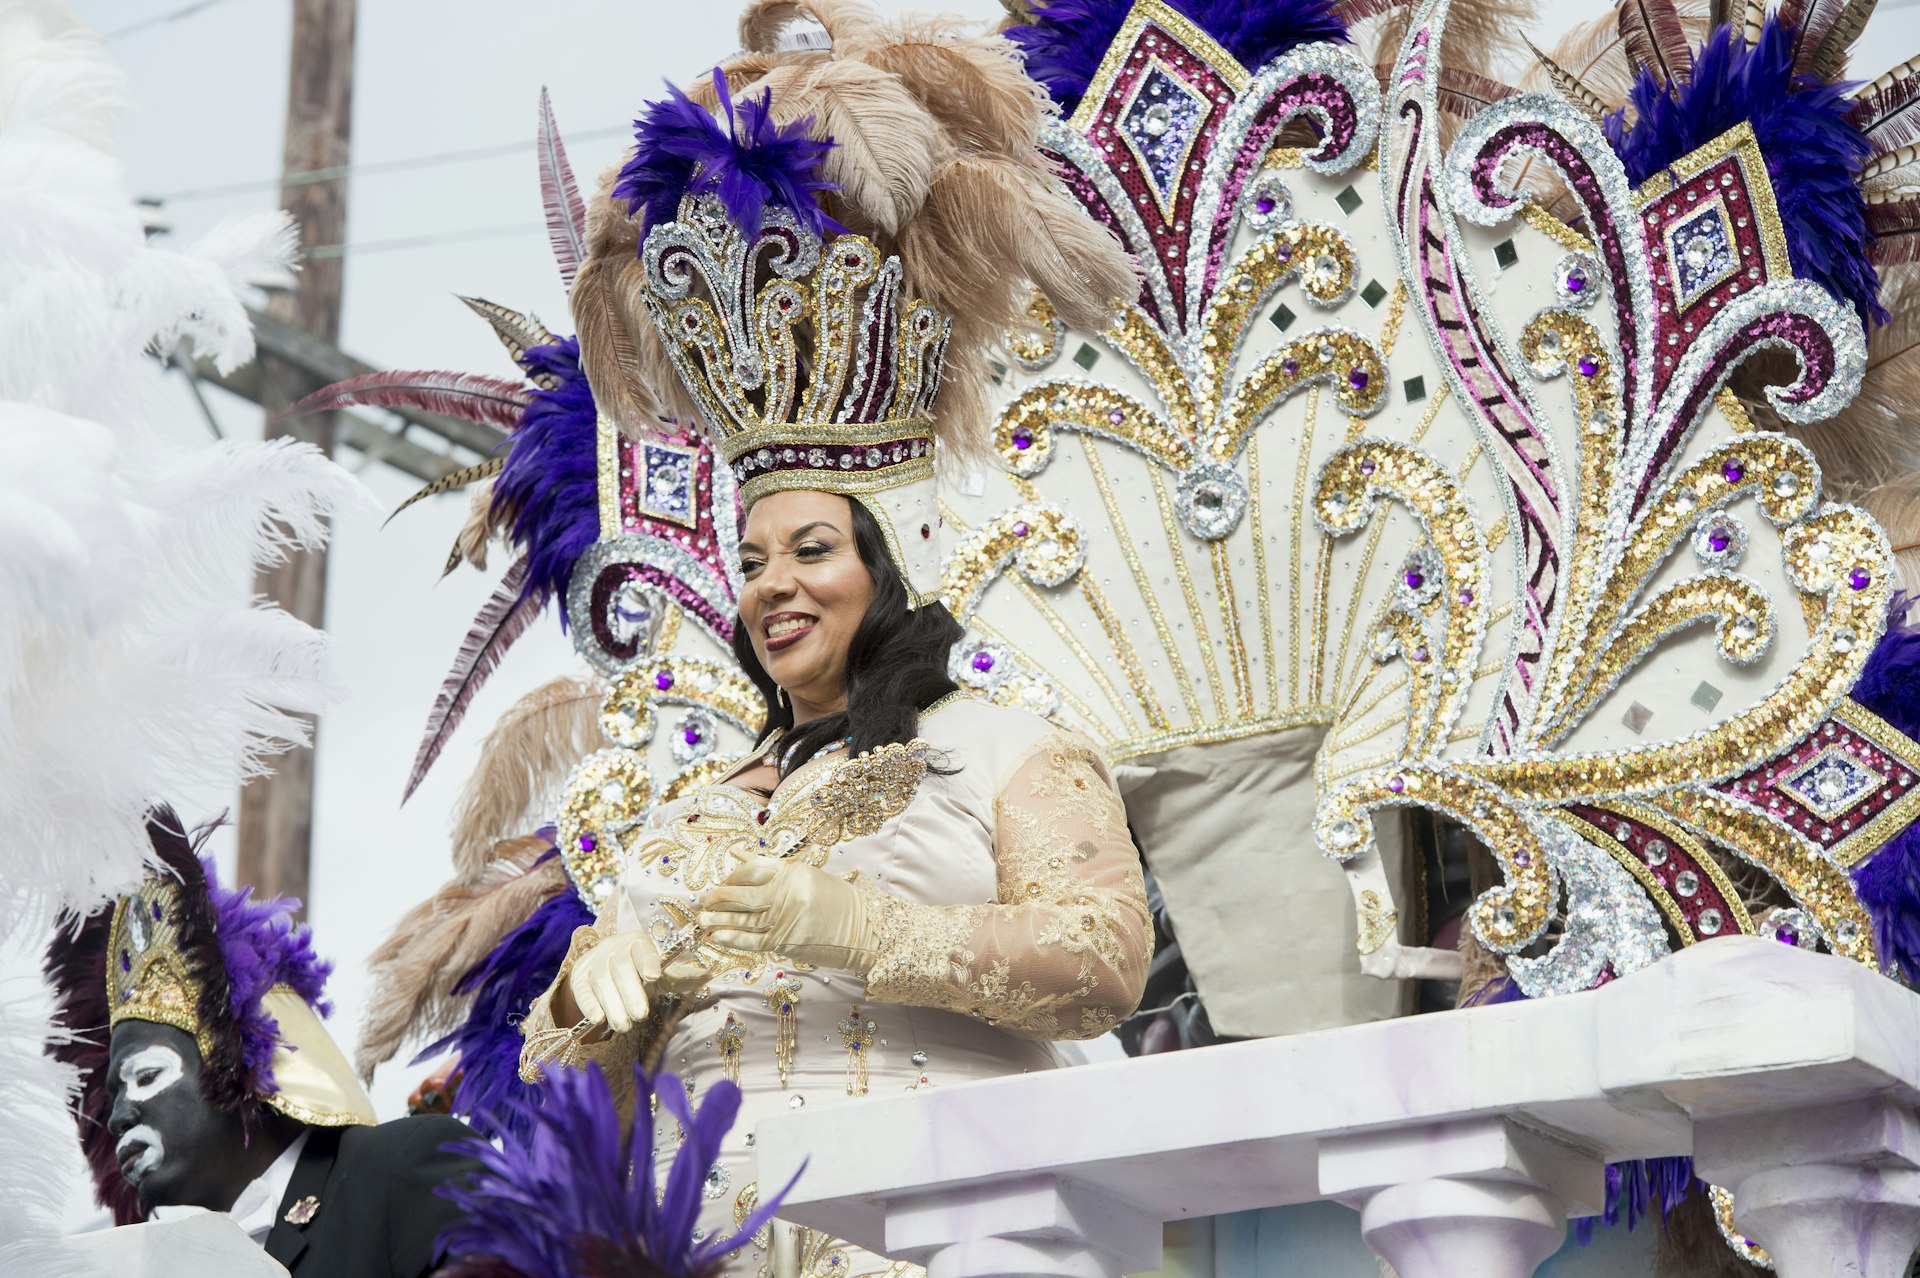 A woman dressed in an elaborately white and gold dress with sequined sleeves. Behind her is a large white, gold, blue and red sequined part of the float.